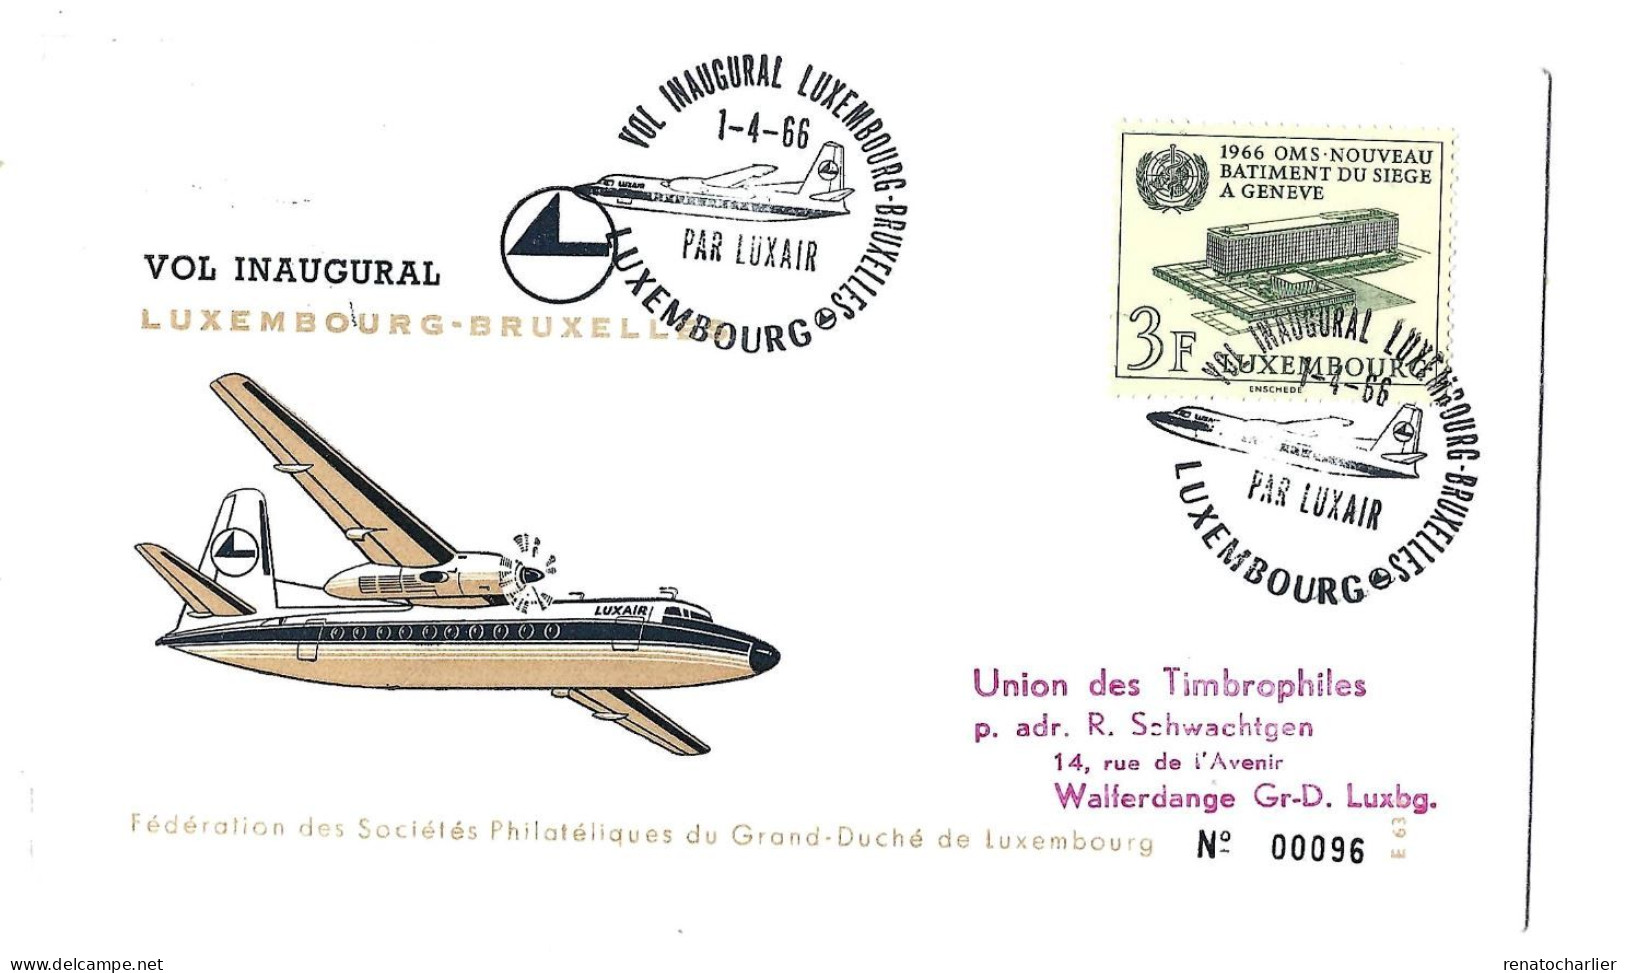 Vol Inaugural Luxembourg-Bruxelles.Luxair.1966. - Lettres & Documents